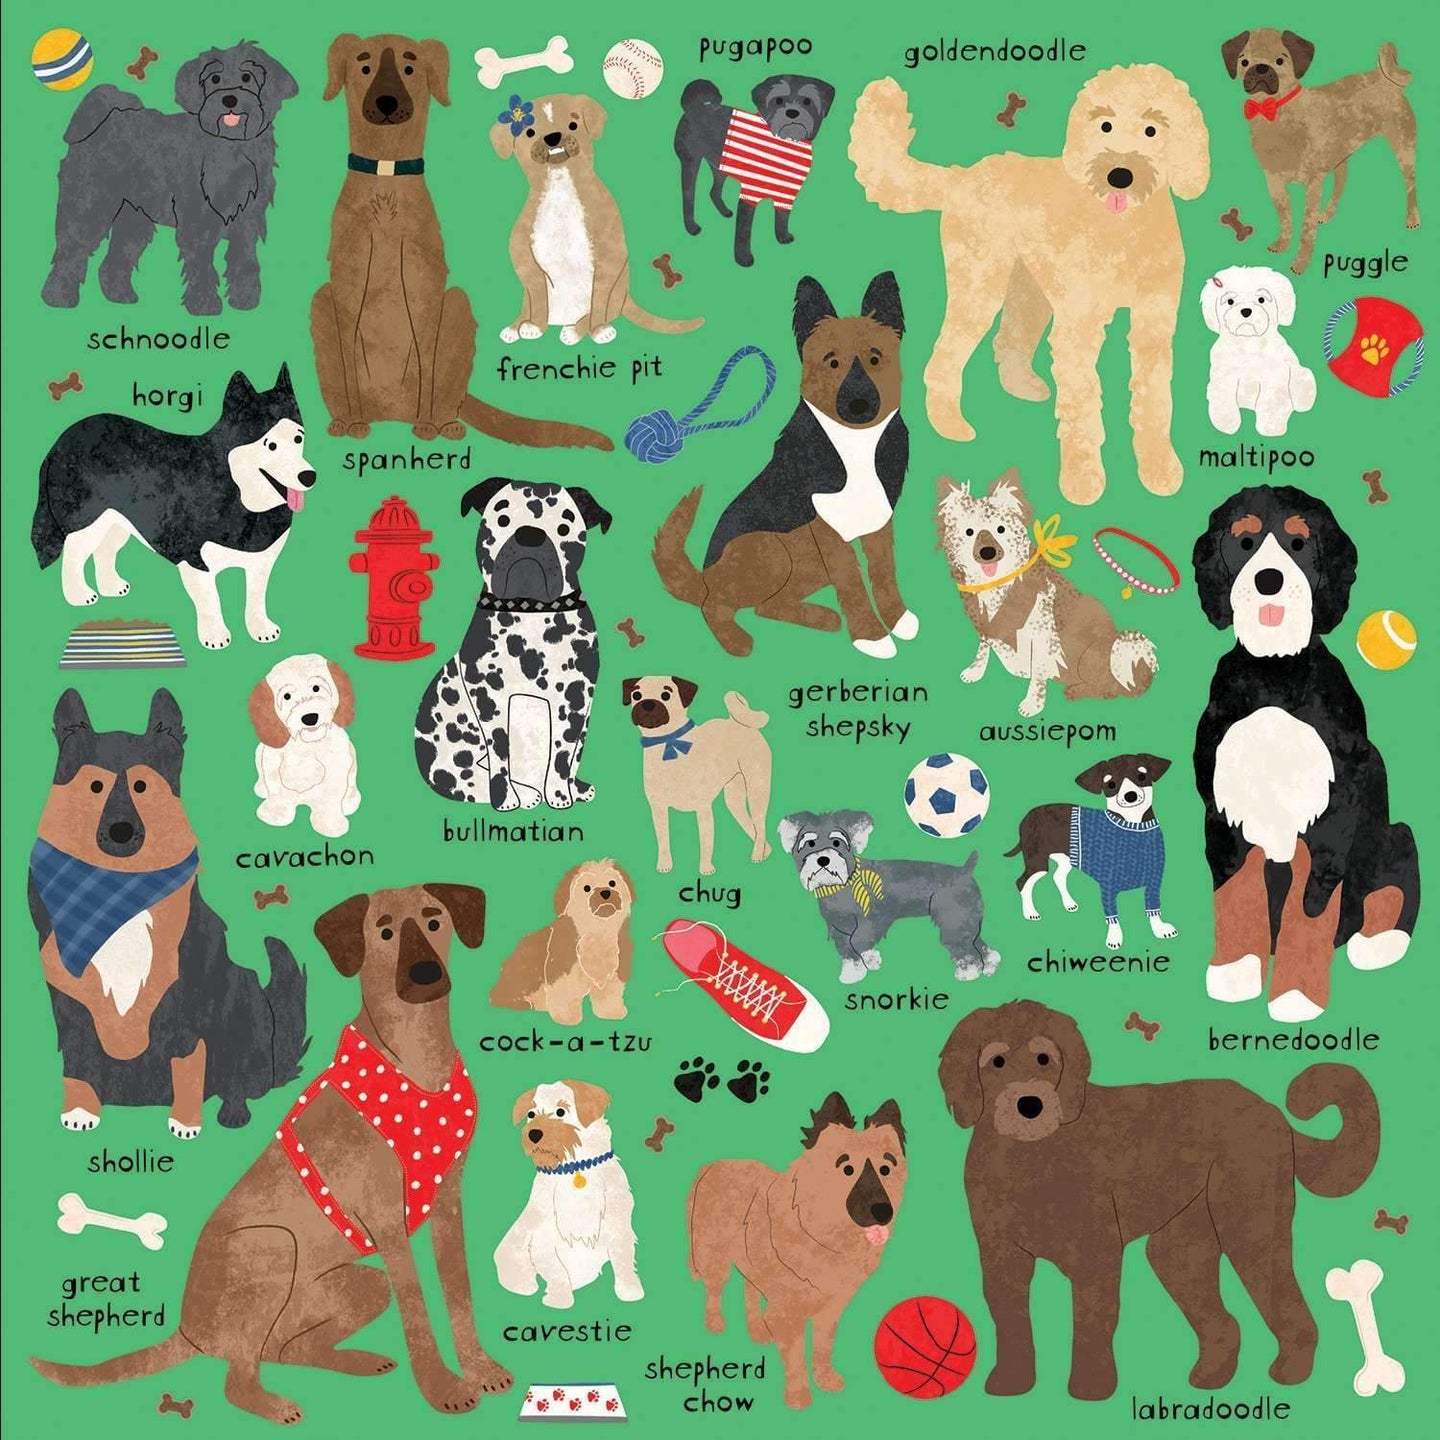 Doodle Dogs and Other Mixed Breeds 500 Piece Puzzle